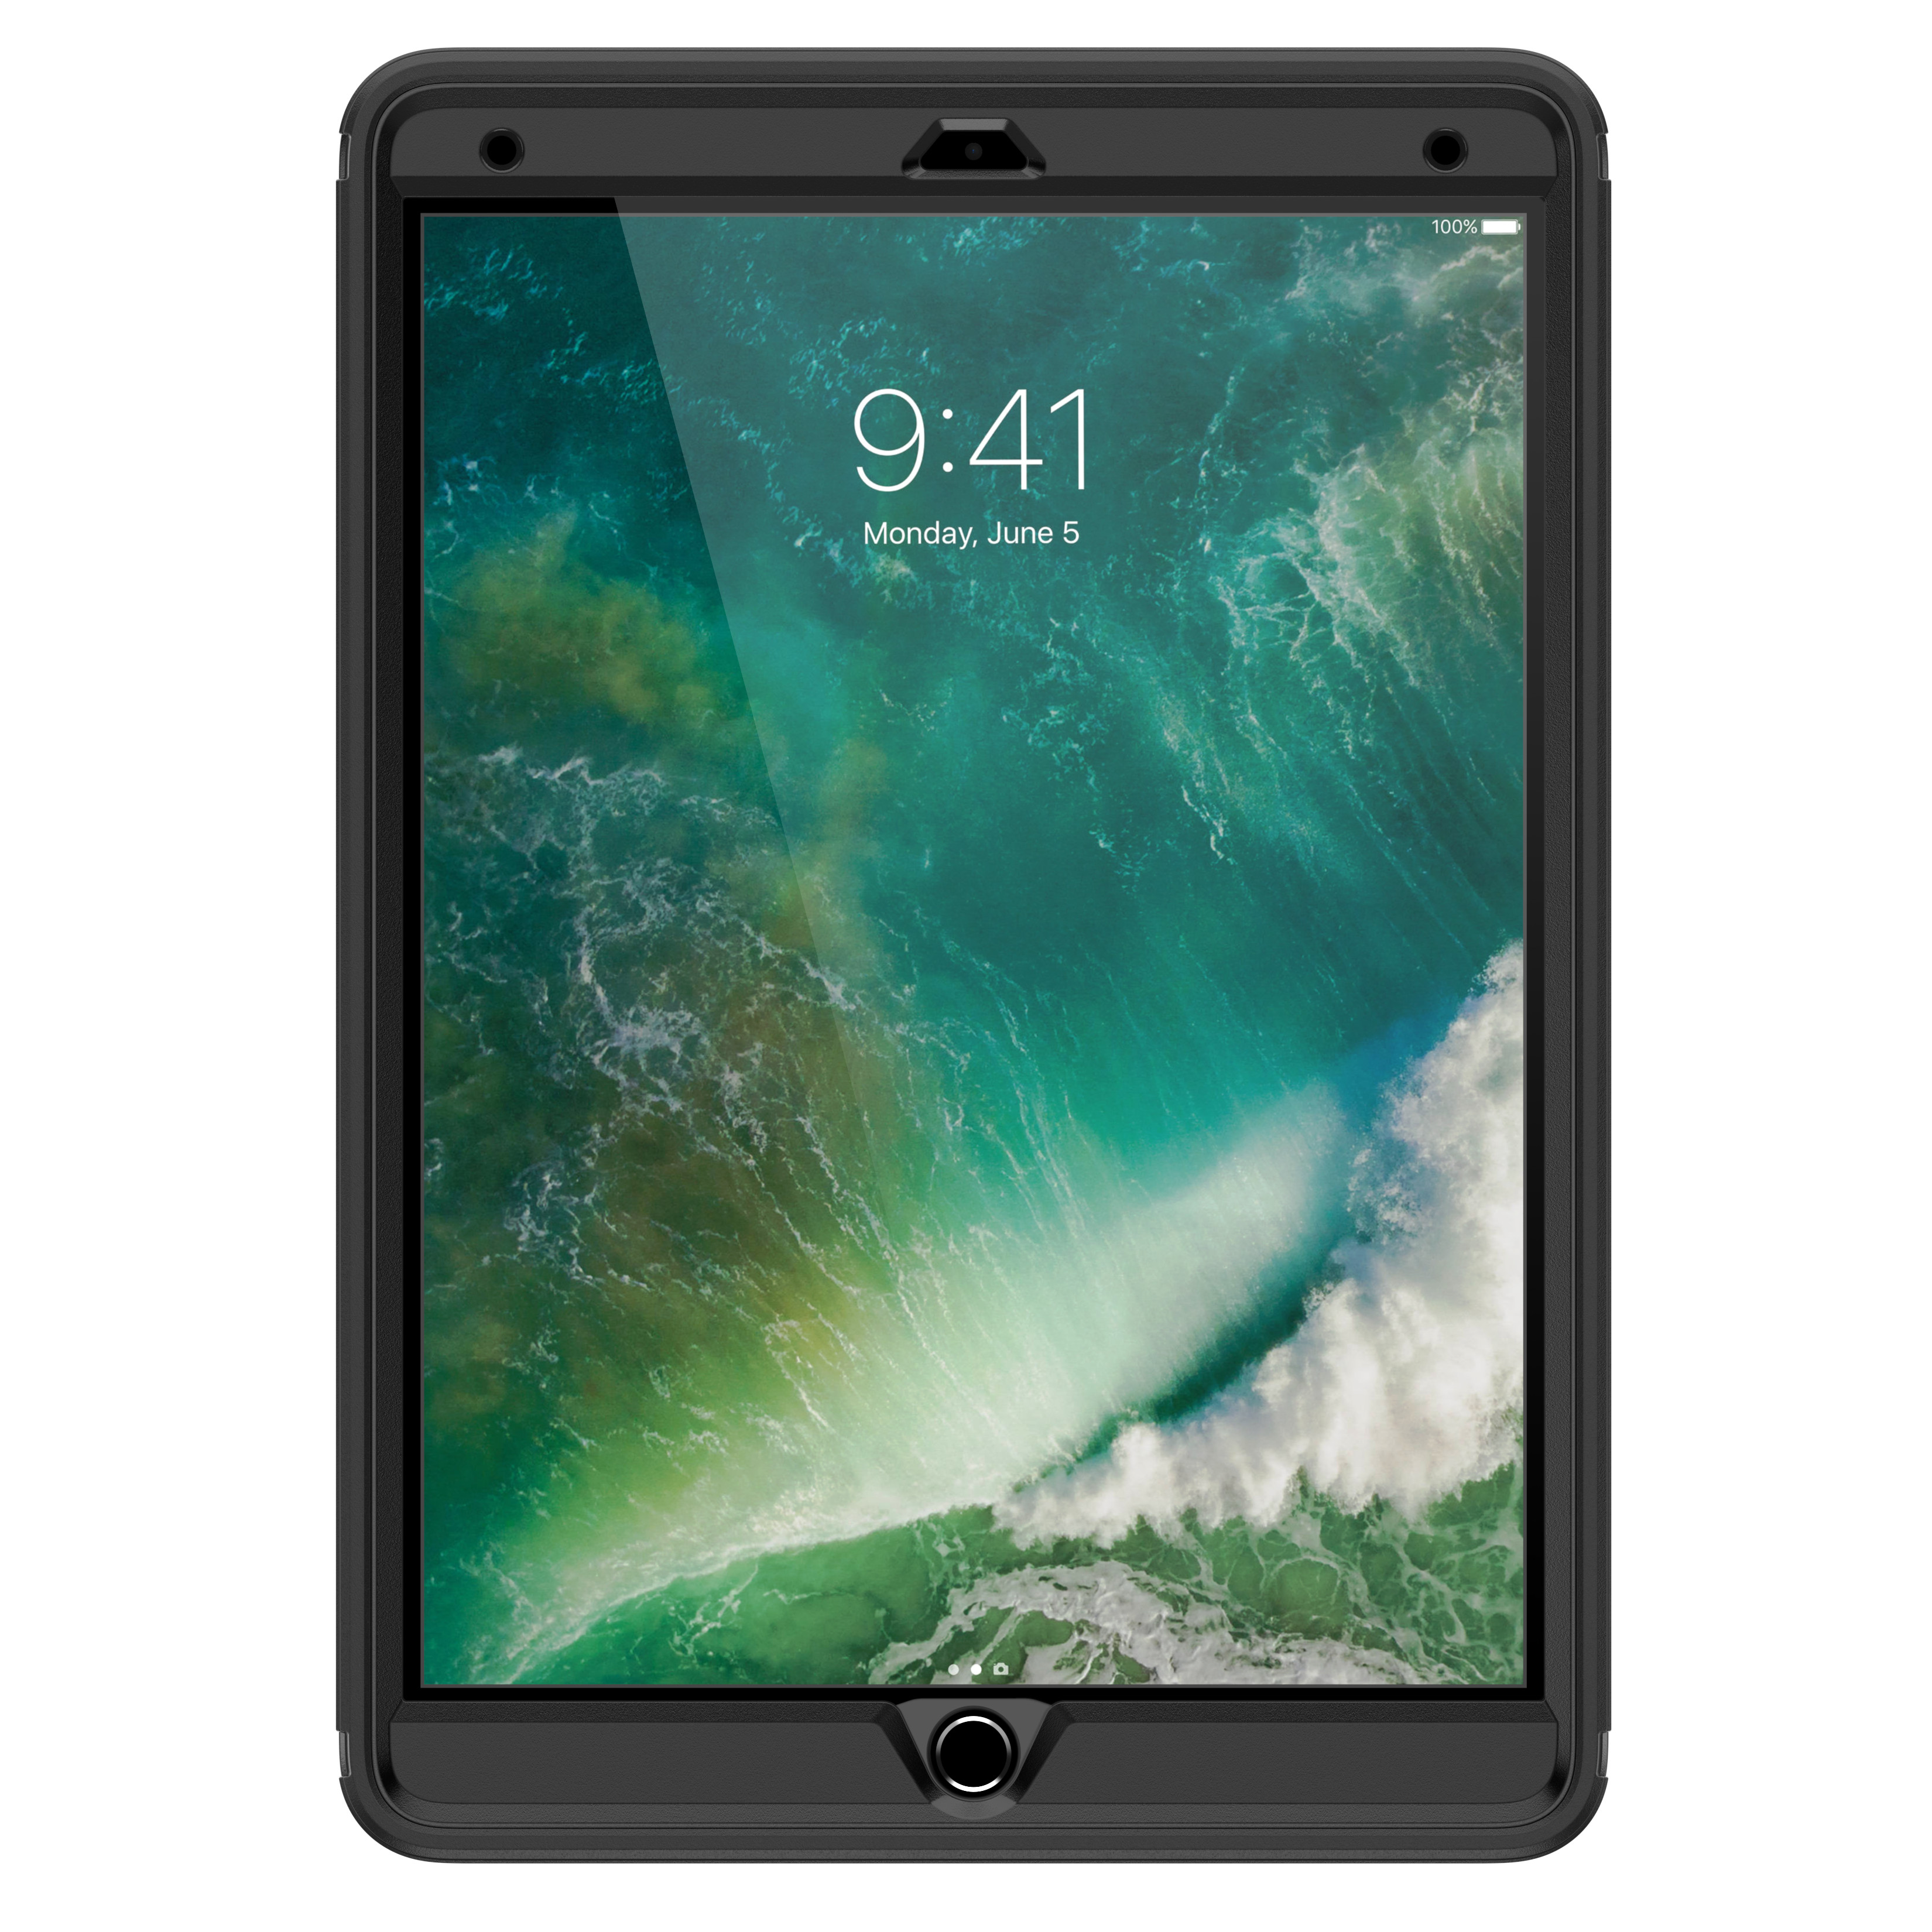 Otterbox - Defender Tablet Case for iPad Pro 10.5/Air (3rd gen), Black - image 5 of 10